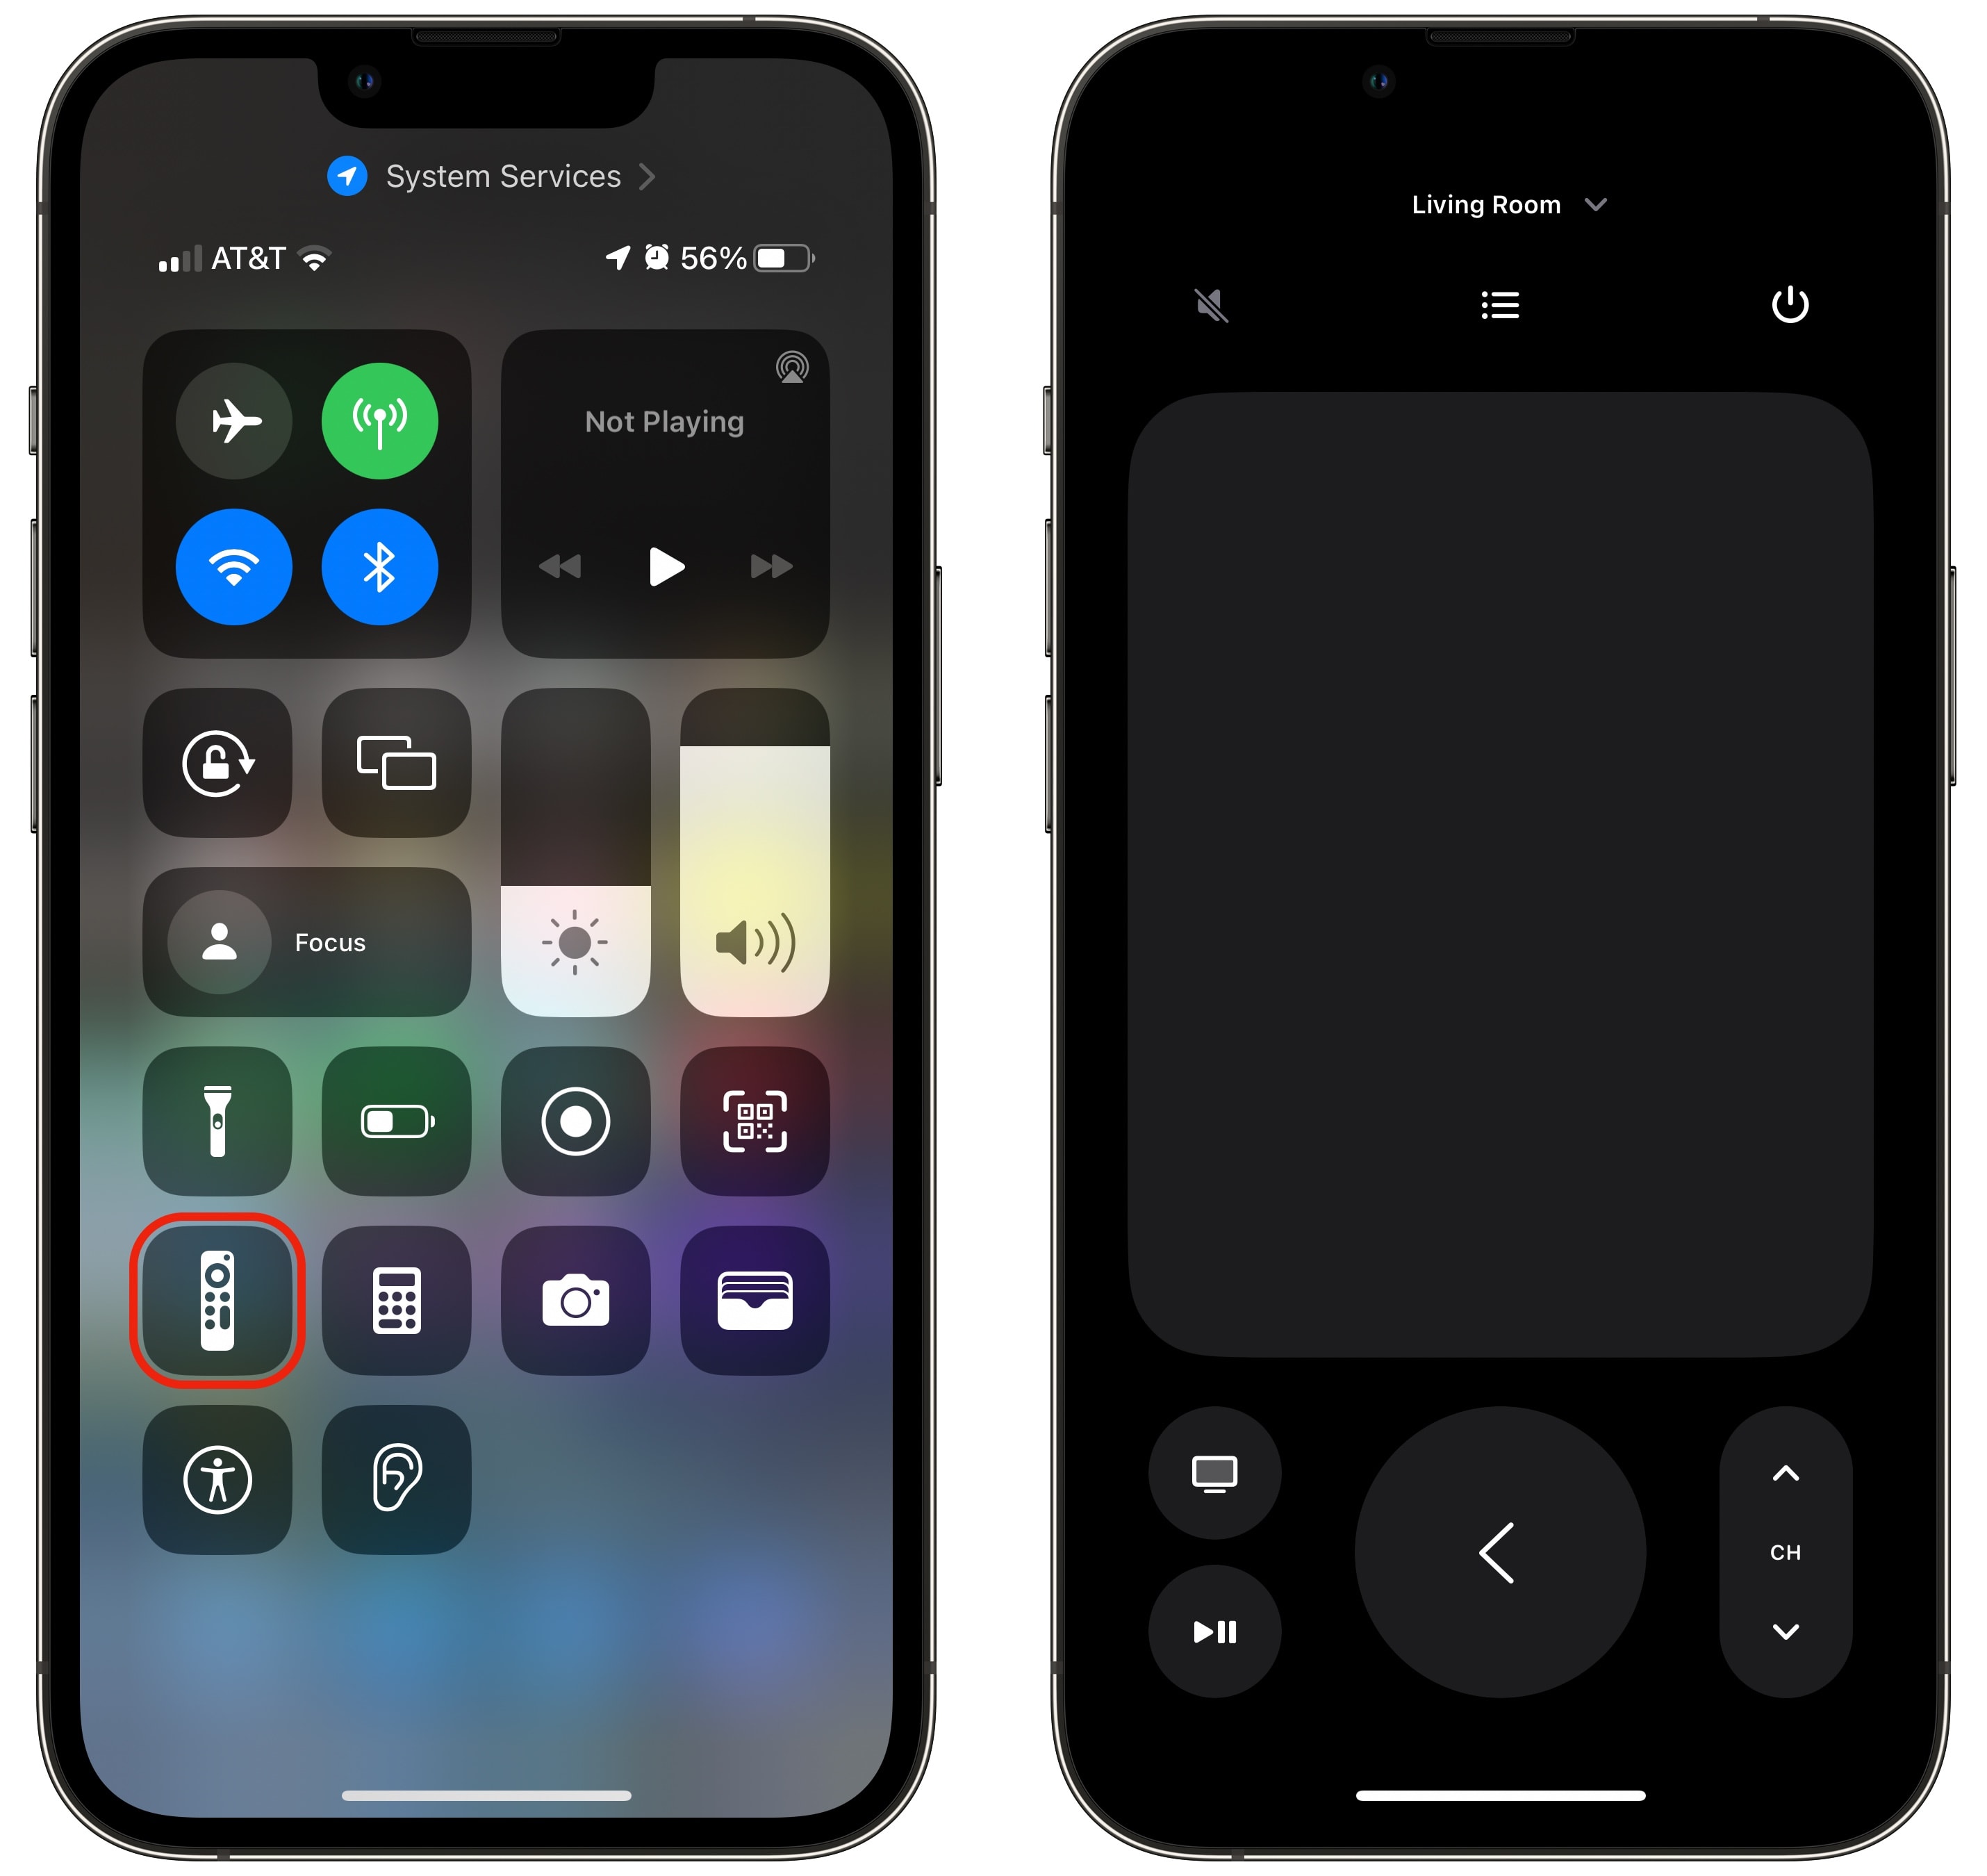 Opening the remote from Control Center